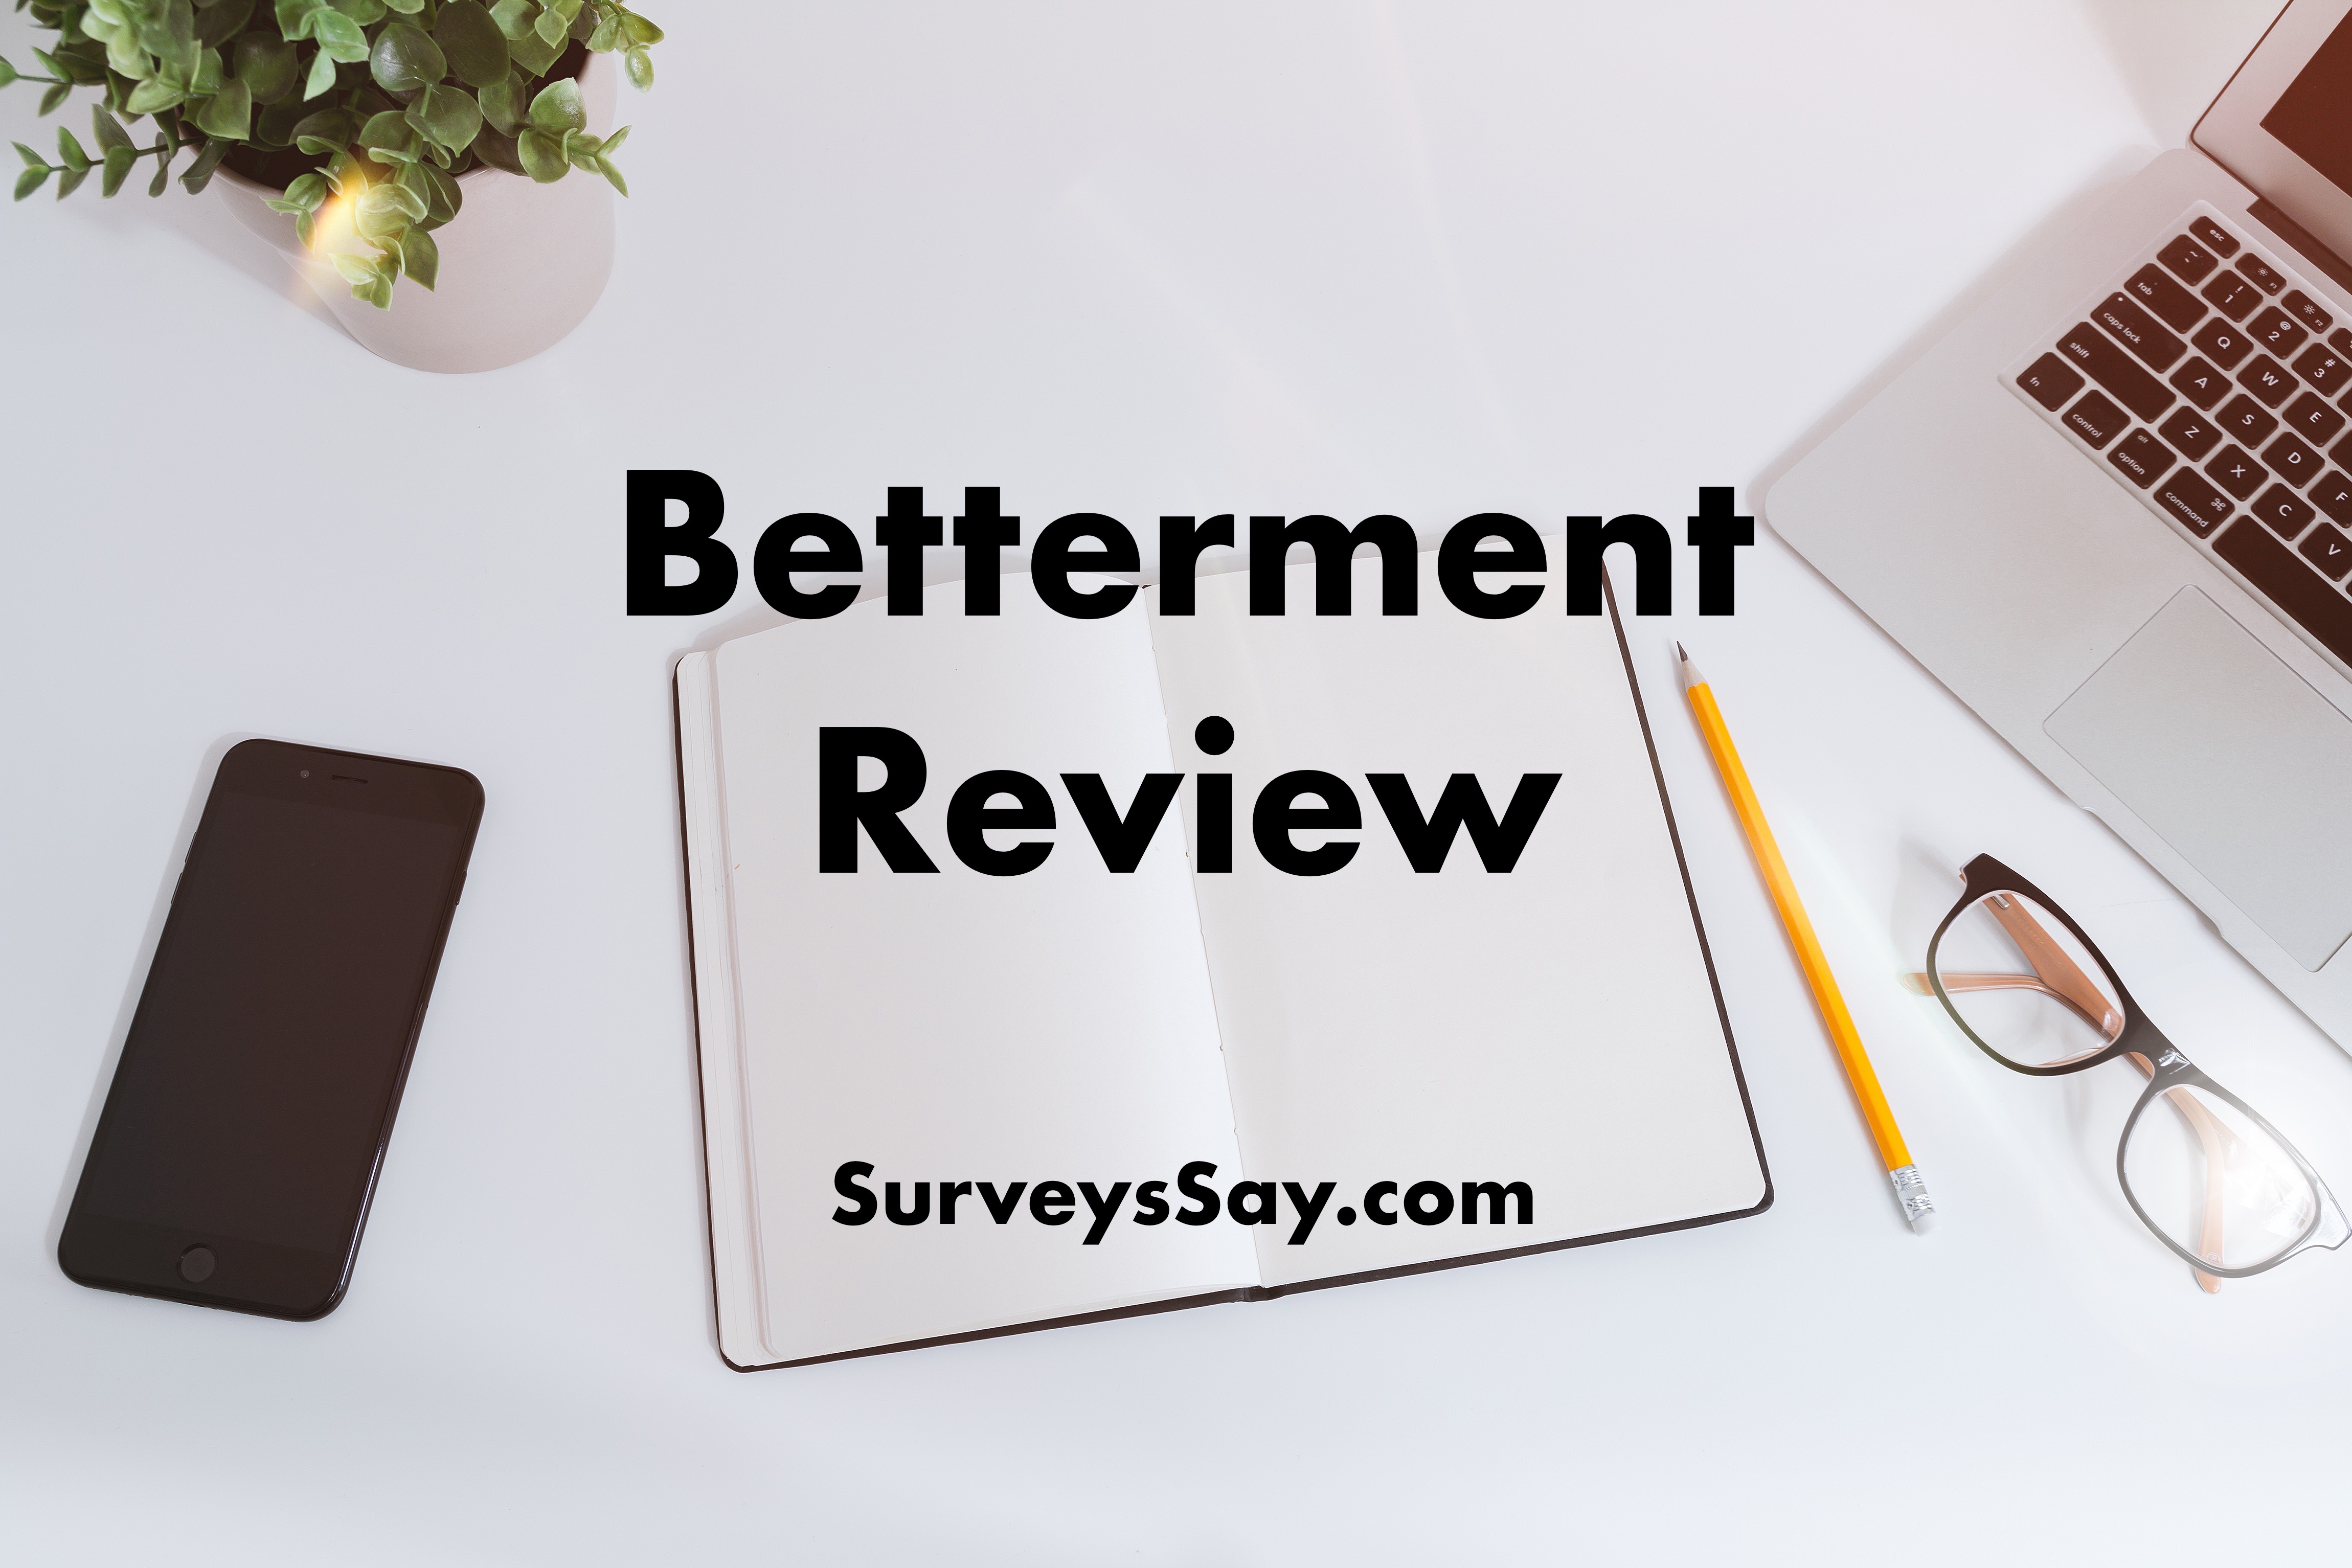 Betterment Review 2018 | Makes Investing Simpler or Just Wastes Time?